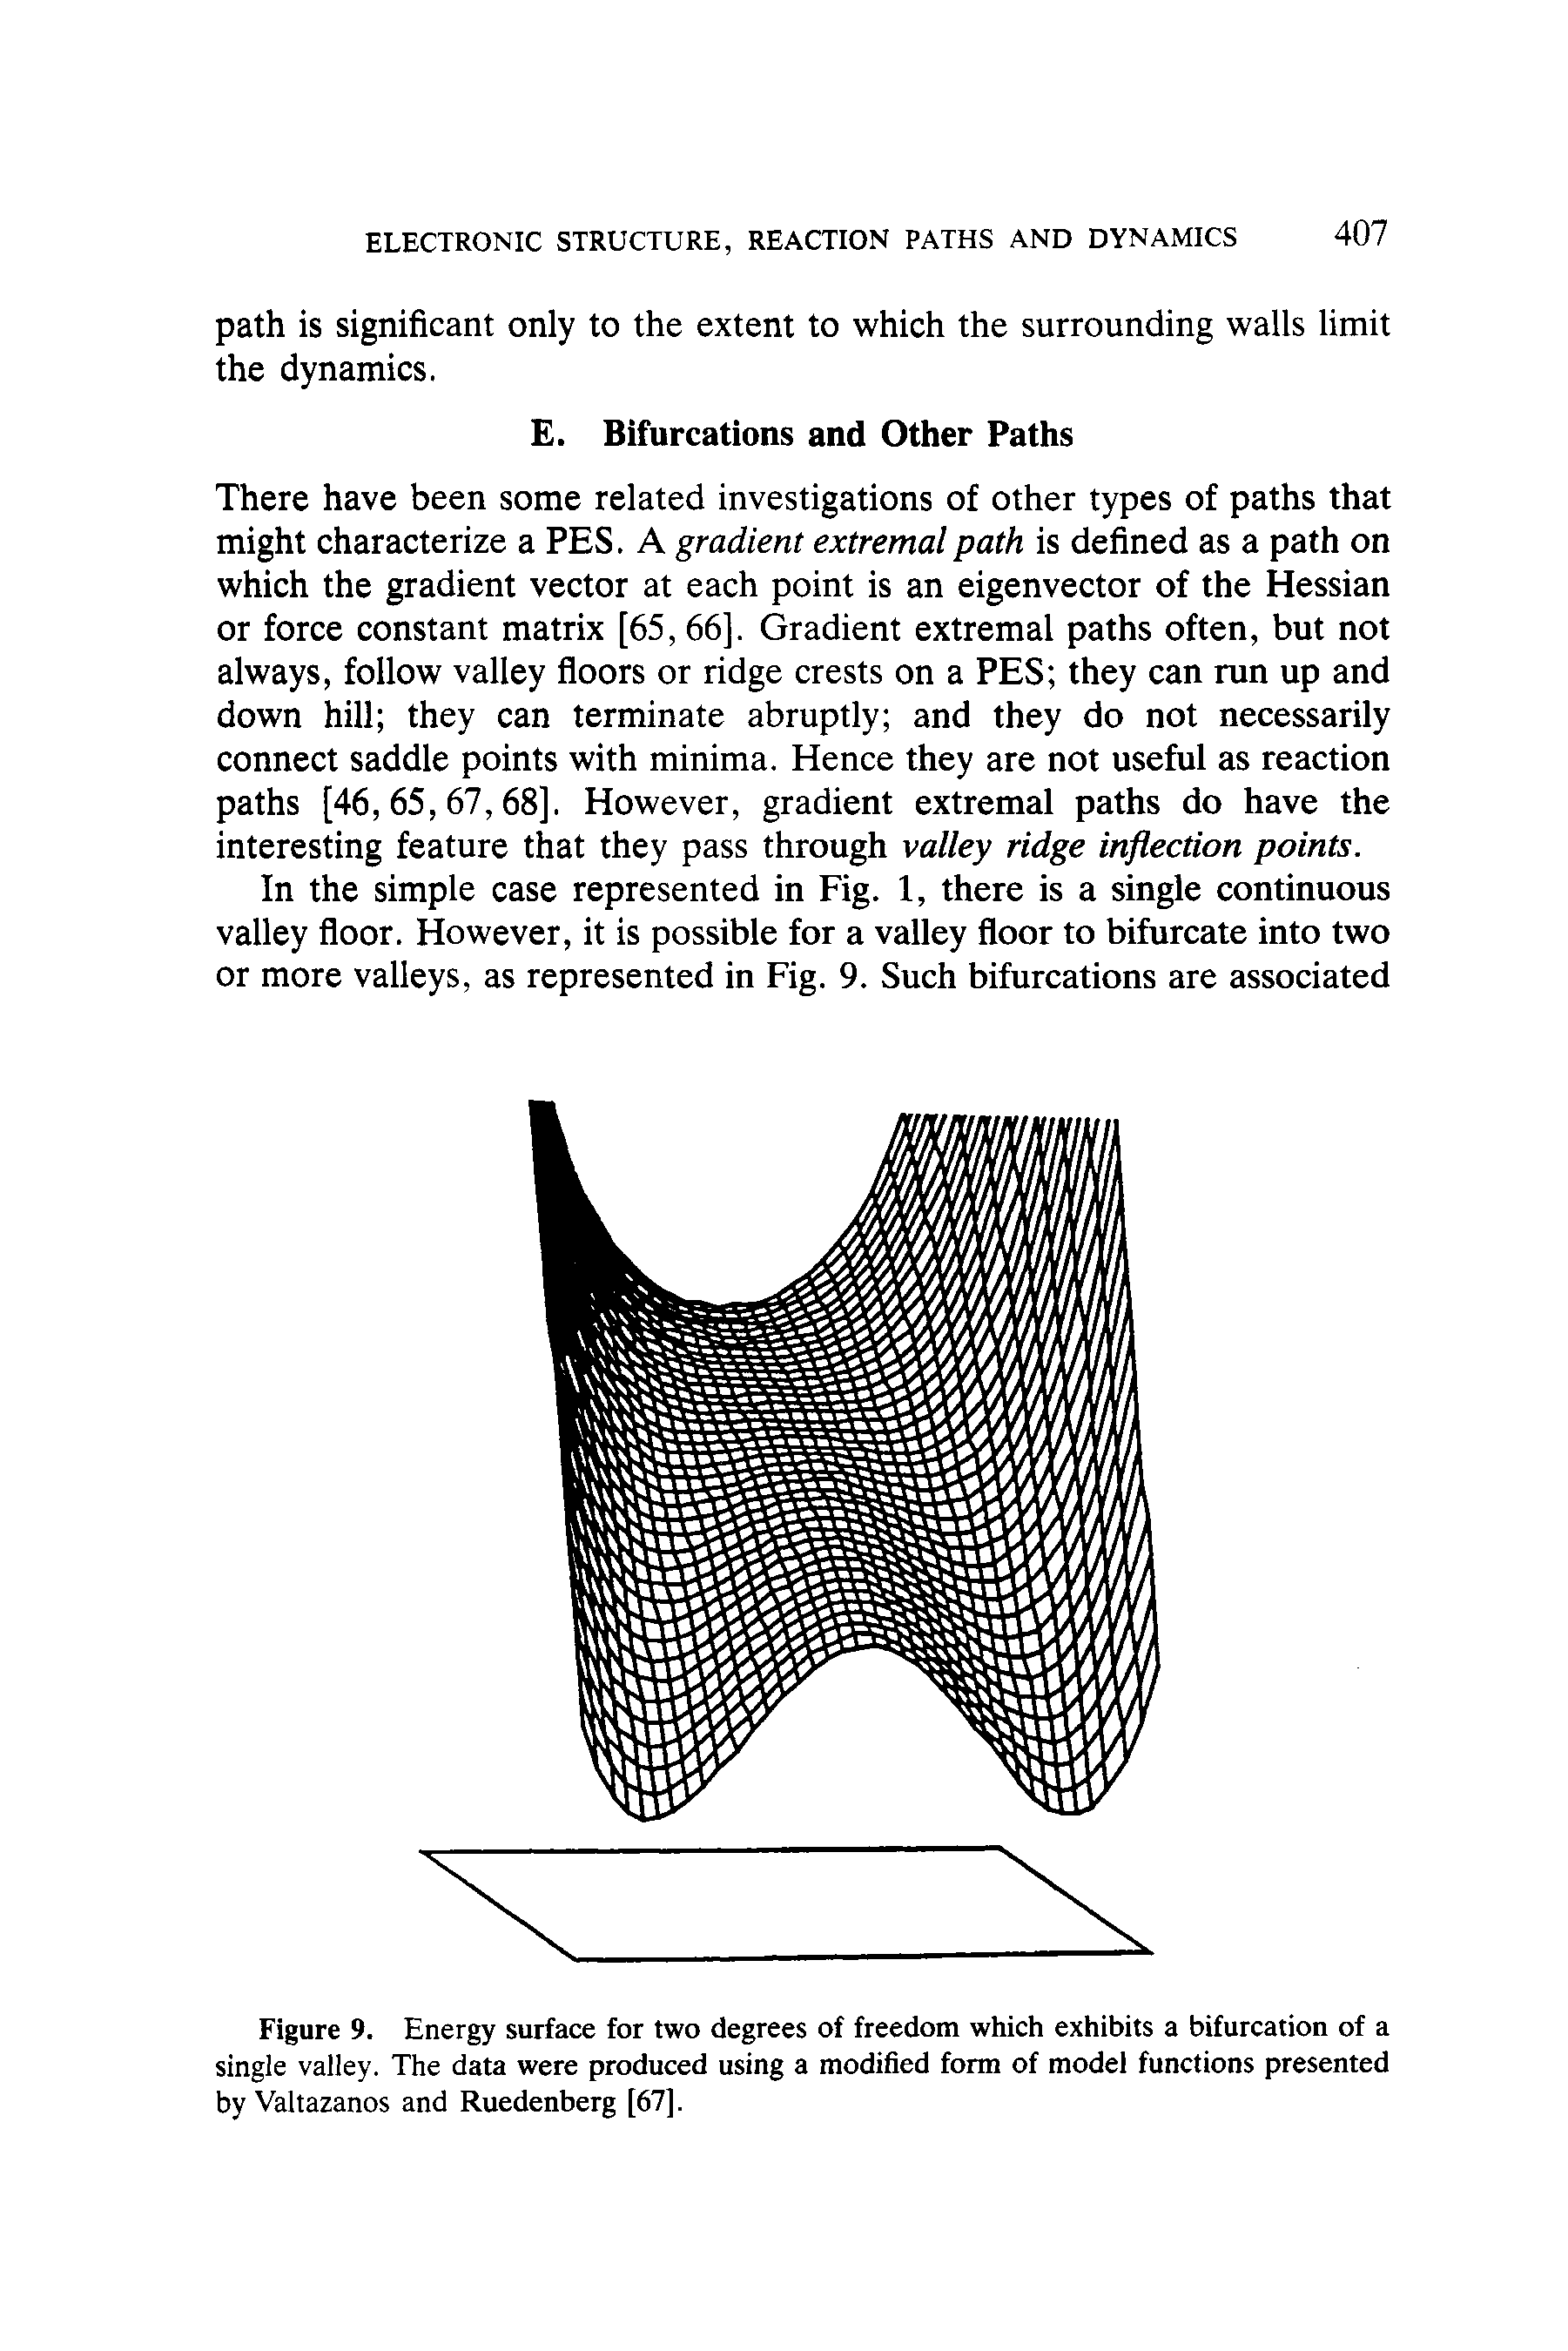 Figure 9. Energy surface for two degrees of freedom which exhibits a bifurcation of a single valley. The data were produced using a modified form of model functions presented by Valtazanos and Ruedenberg [67].